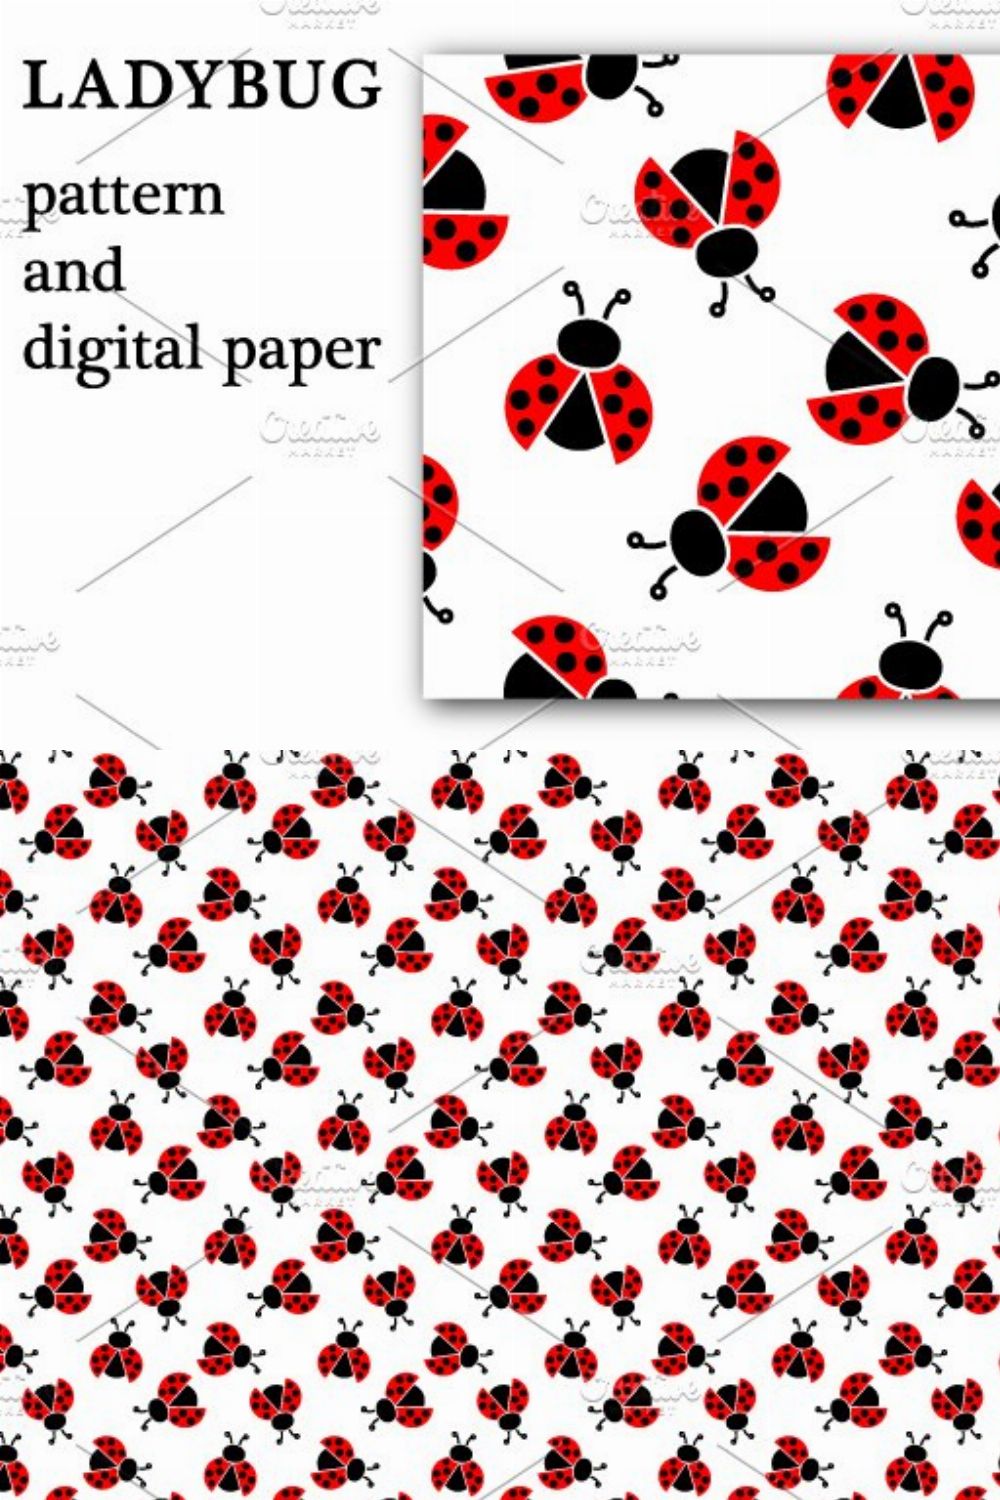 Ladybug - pattern and digital paper pinterest preview image.